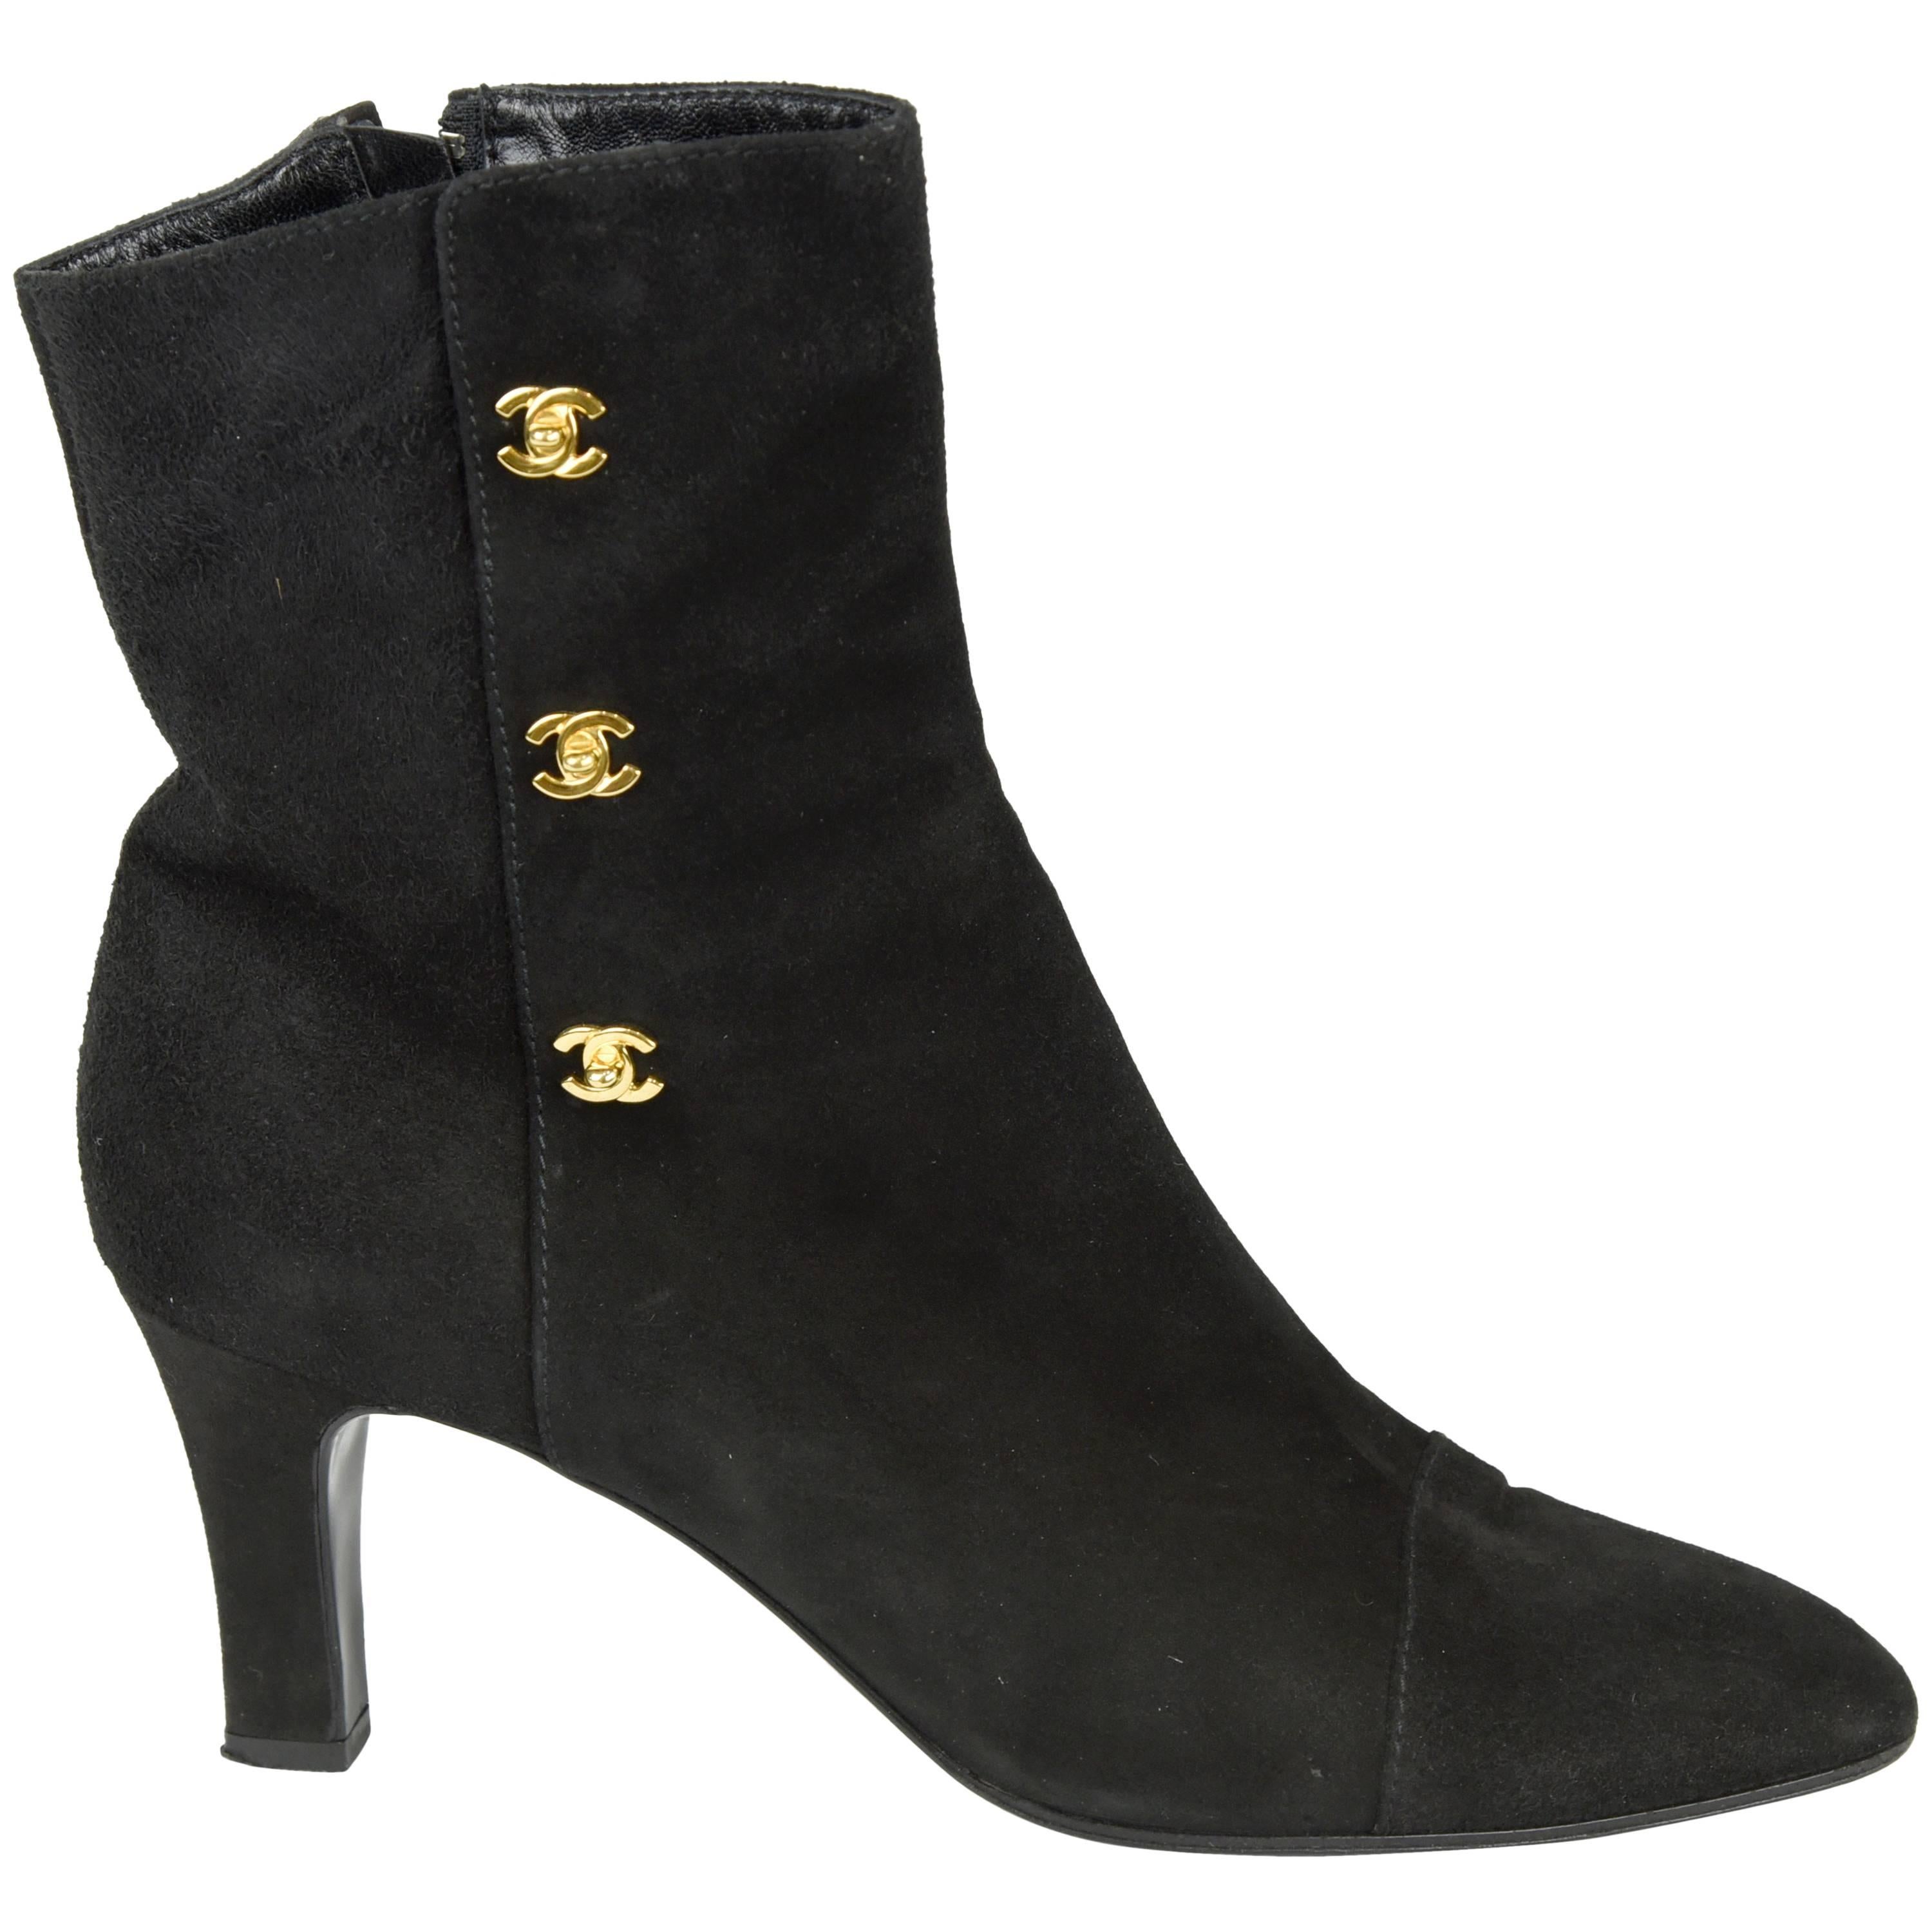 Chanel 1990s Black Suede Ankle Boots with 3 Gold "CC" Logo, Size 41 1/2 Pristine For Sale